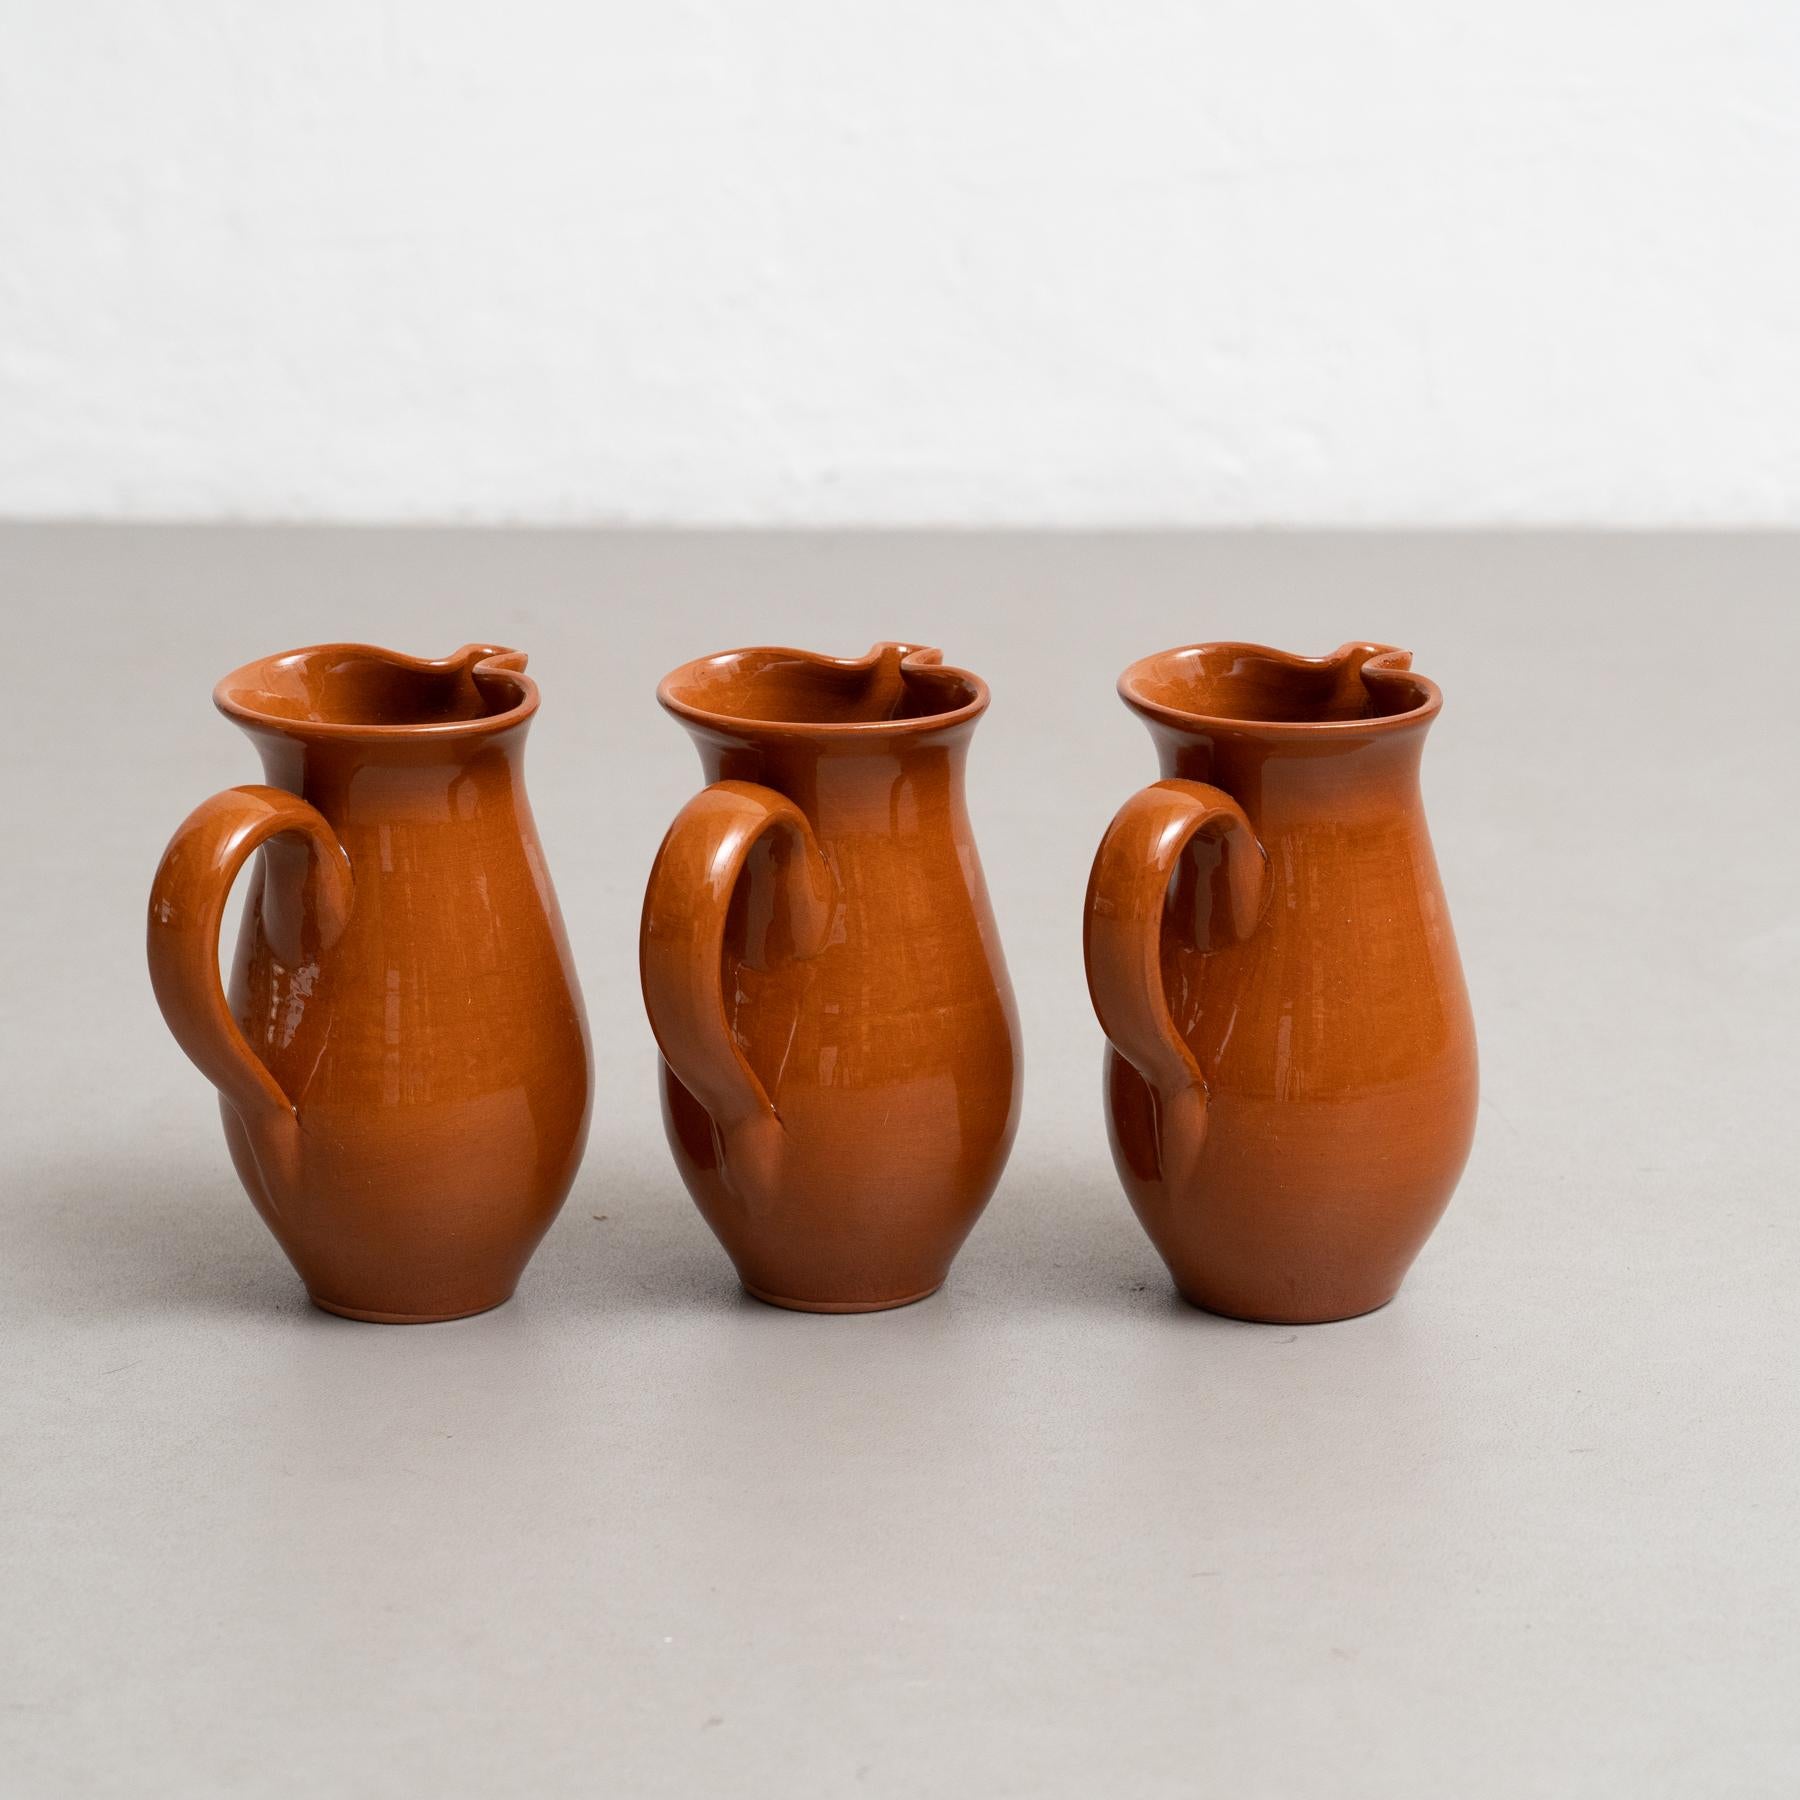 Mid 20th century set of three traditional Spanish ceramic vases.

Manufactured in Spain.

In original condition with minor wear consistent of age and use, preserving a beautiful patina.

Materials: 
Ceramic

Important information regarding color(s)